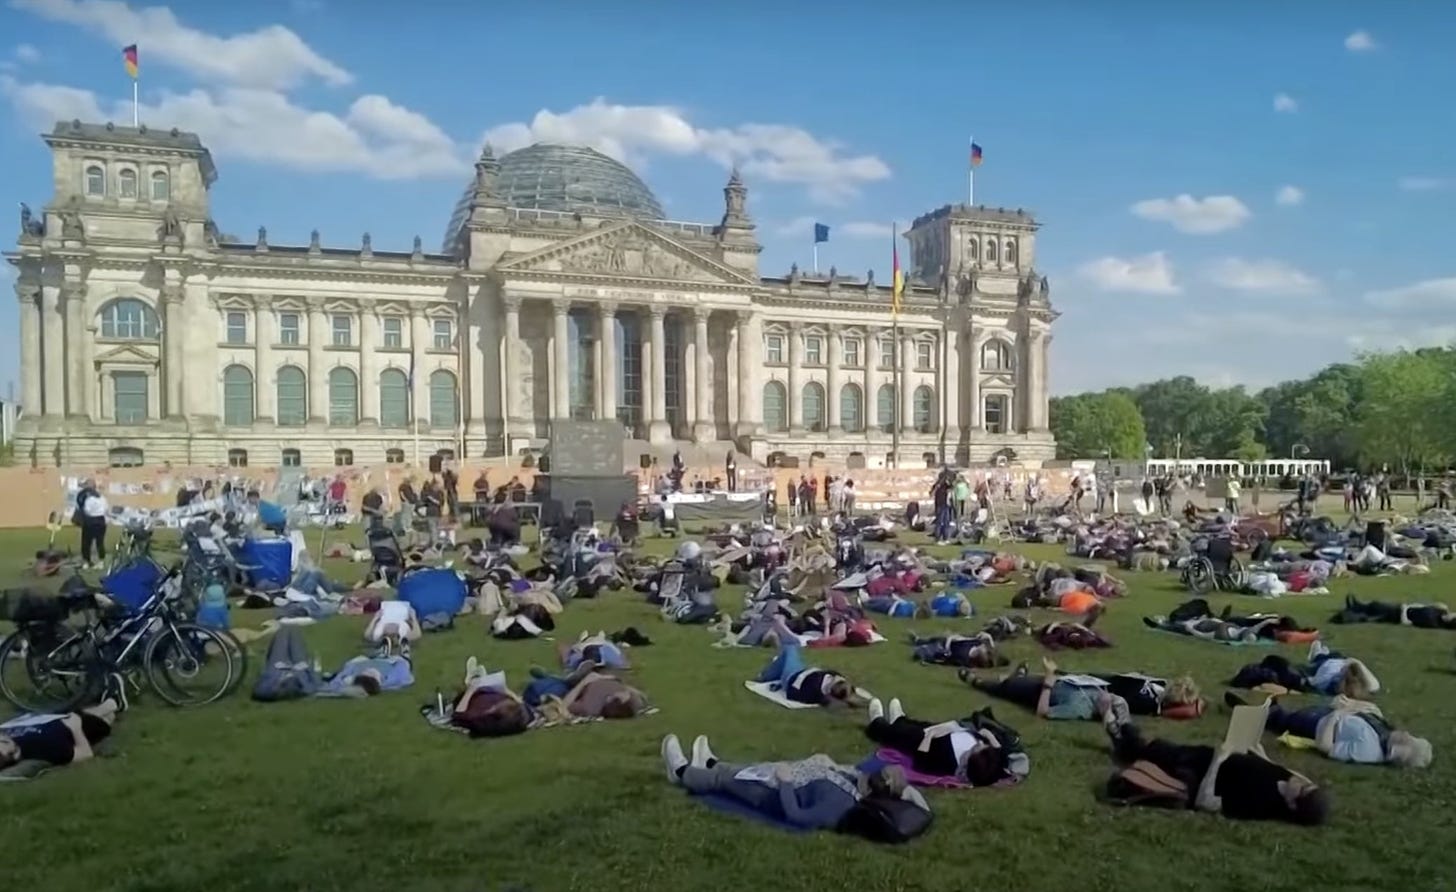 Hundreds of Middle-Aged German Women Lie Down on a Lawn in Berlin to Protest Long Covid Https%3A%2F%2Fsubstack-post-media.s3.amazonaws.com%2Fpublic%2Fimages%2F0d6033c1-cb8e-4132-8656-66f75707b63e_2076x1272